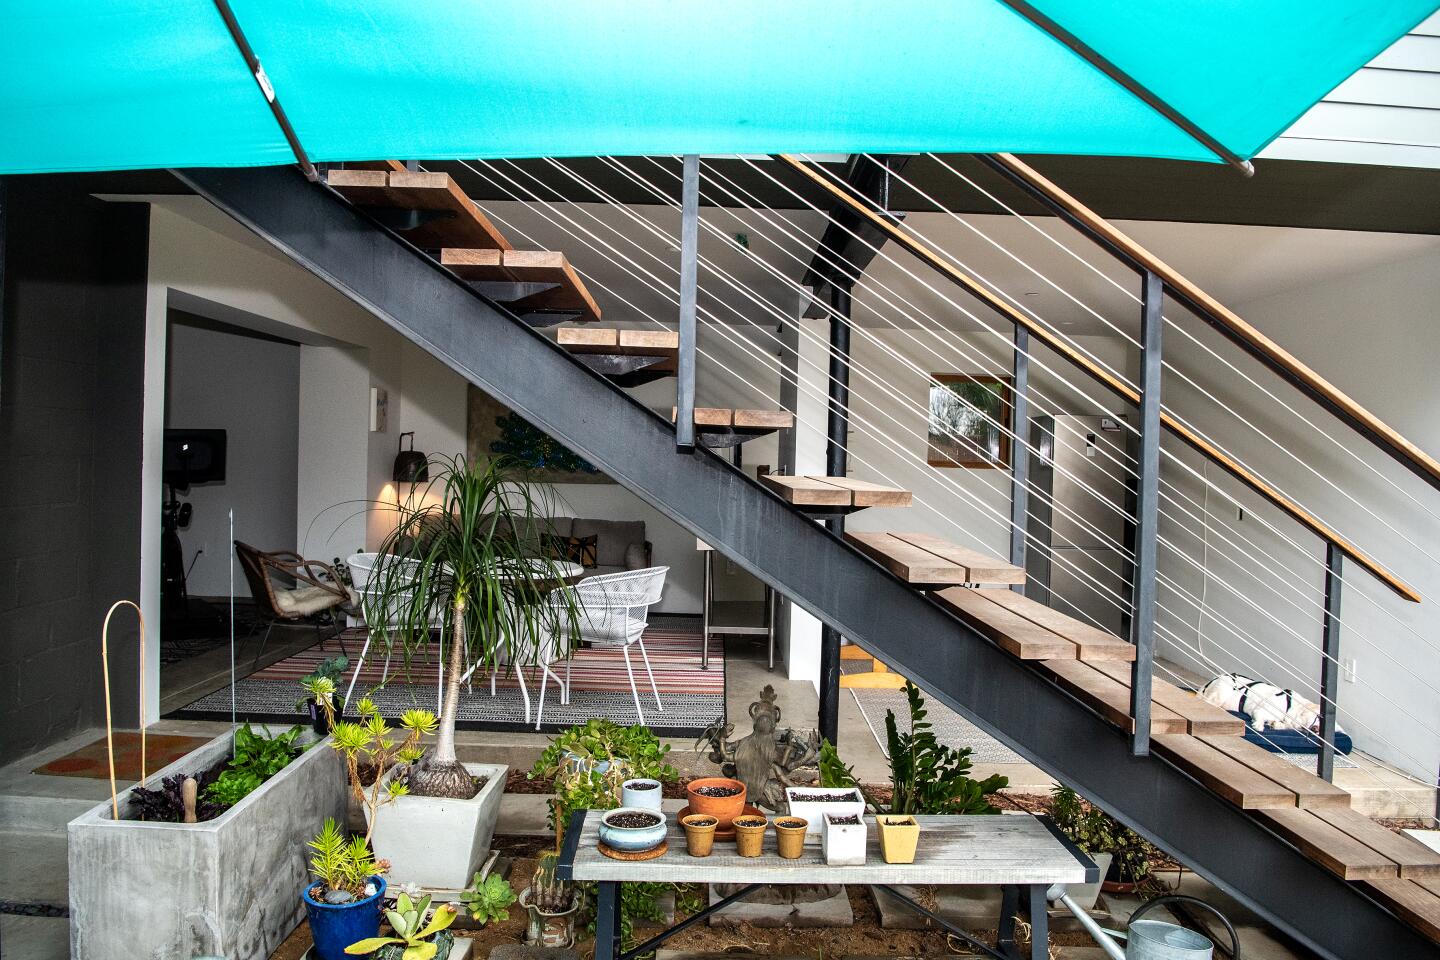 An outdoor living area is located beneath the ADU, which is accessed by stairs.